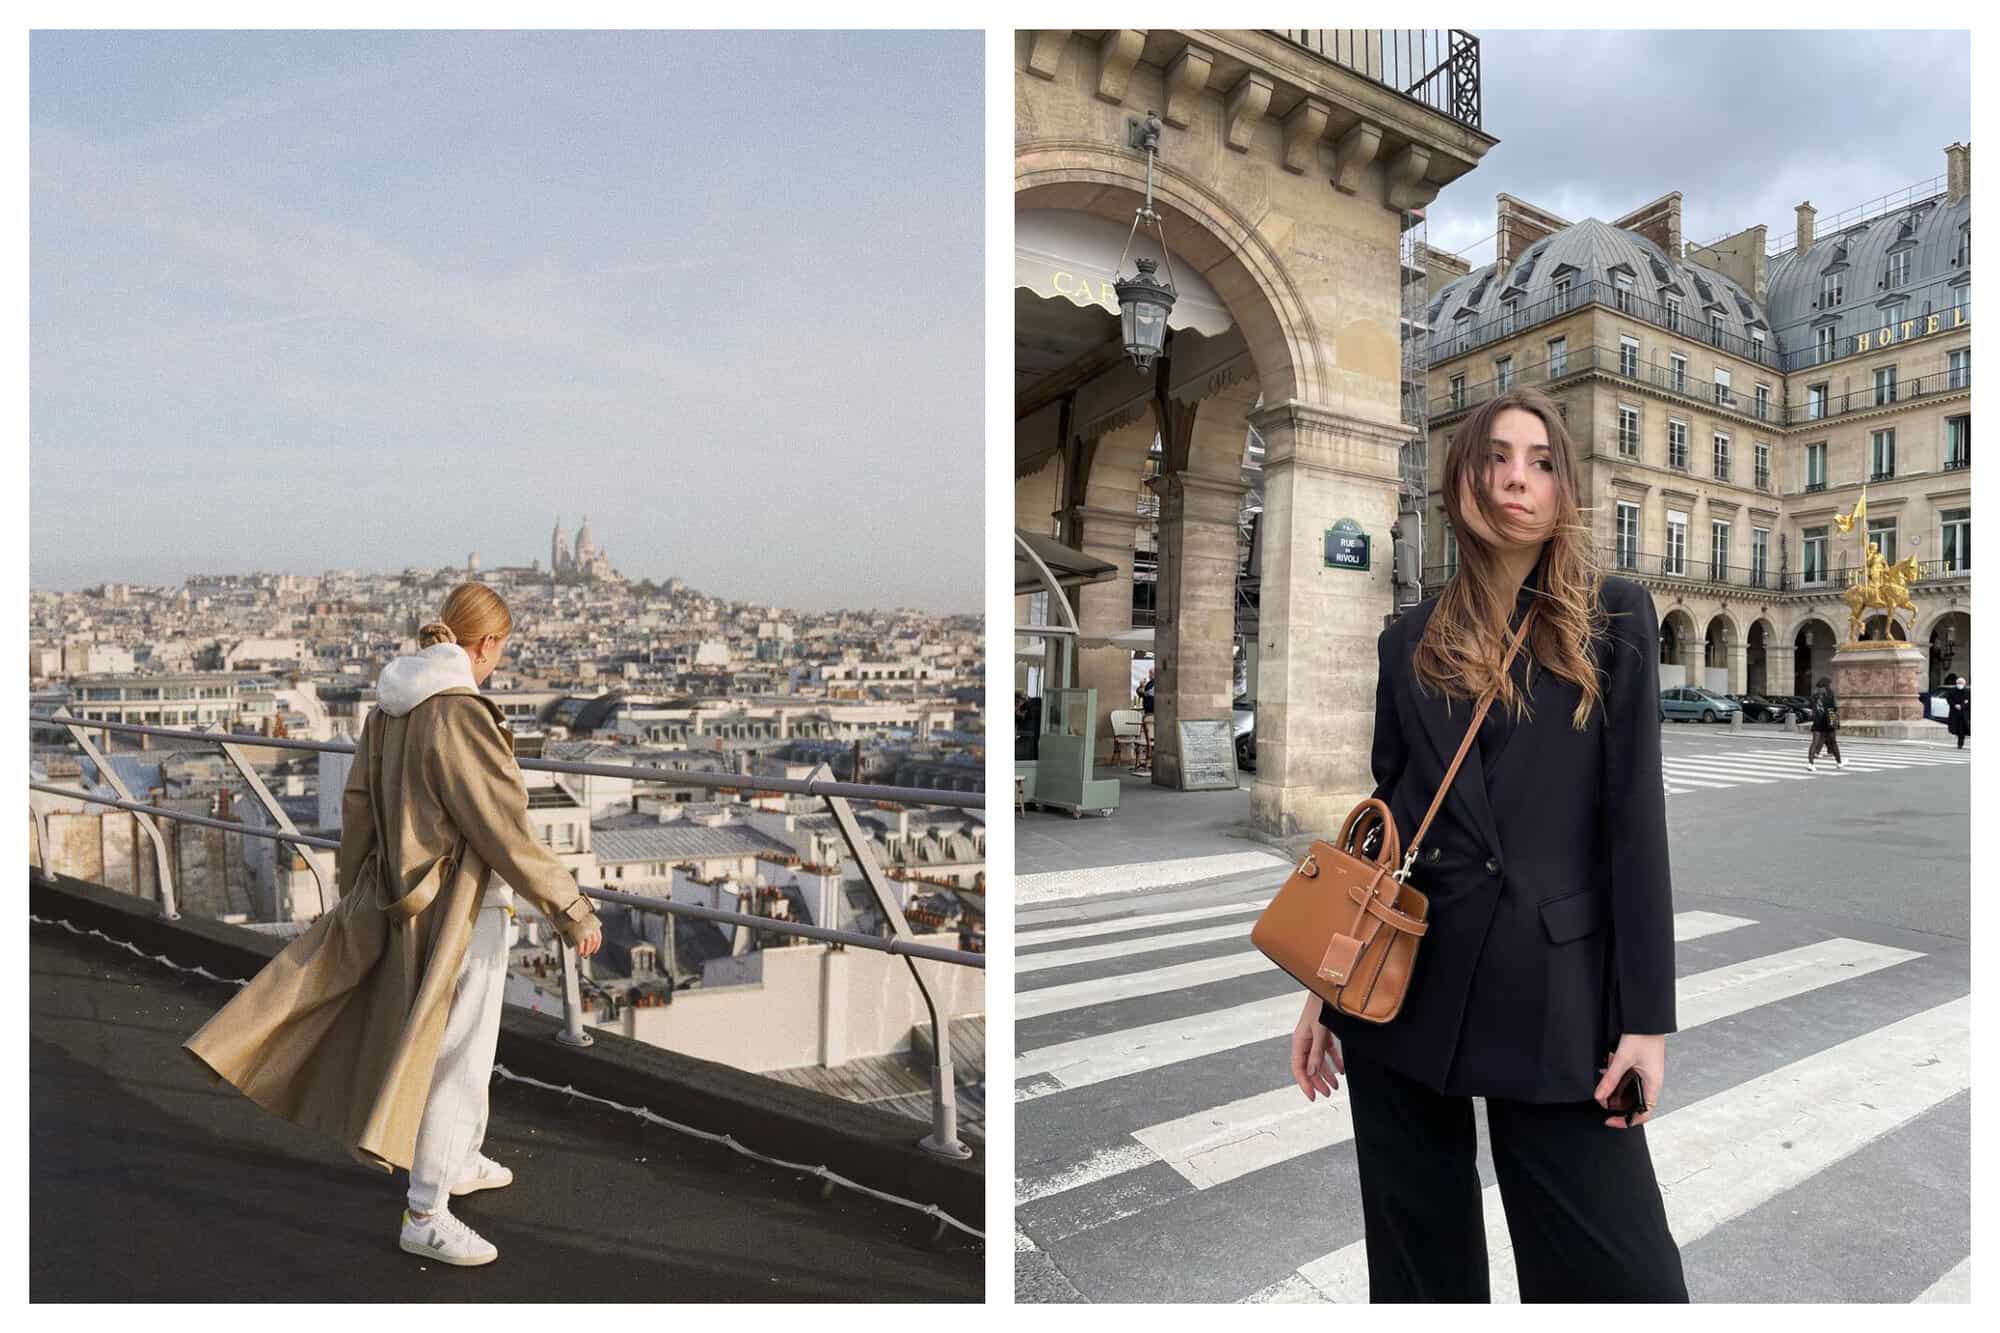 Left- A woman in a trench coat stands on a rooftop.
Right- A woman stands in all black in a Paris street. 